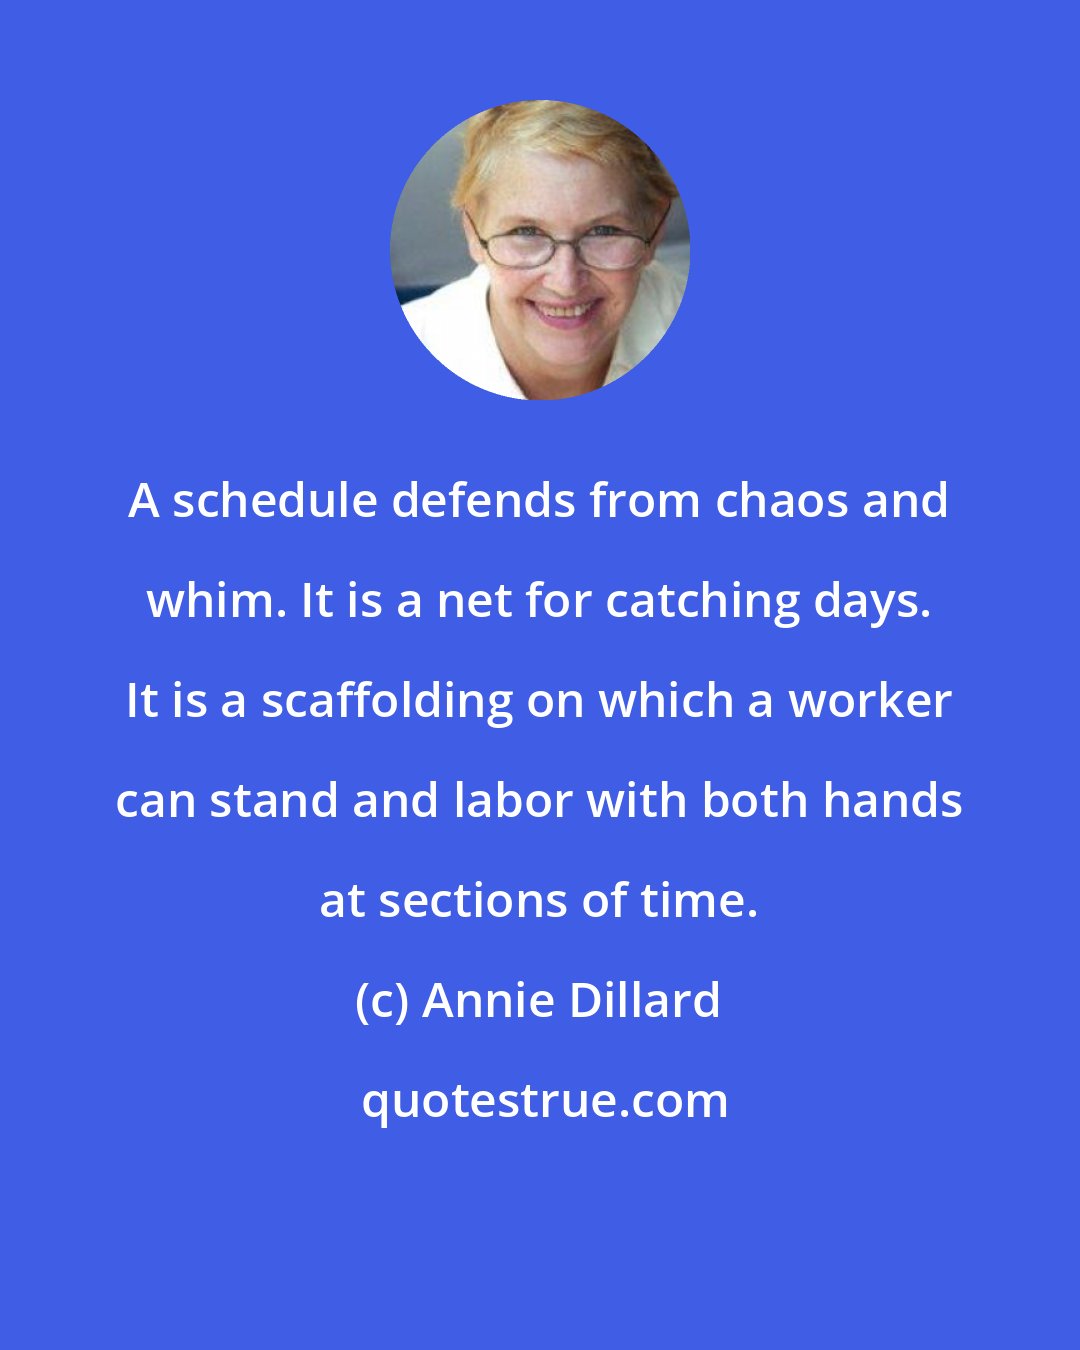 Annie Dillard: A schedule defends from chaos and whim. It is a net for catching days. It is a scaffolding on which a worker can stand and labor with both hands at sections of time.